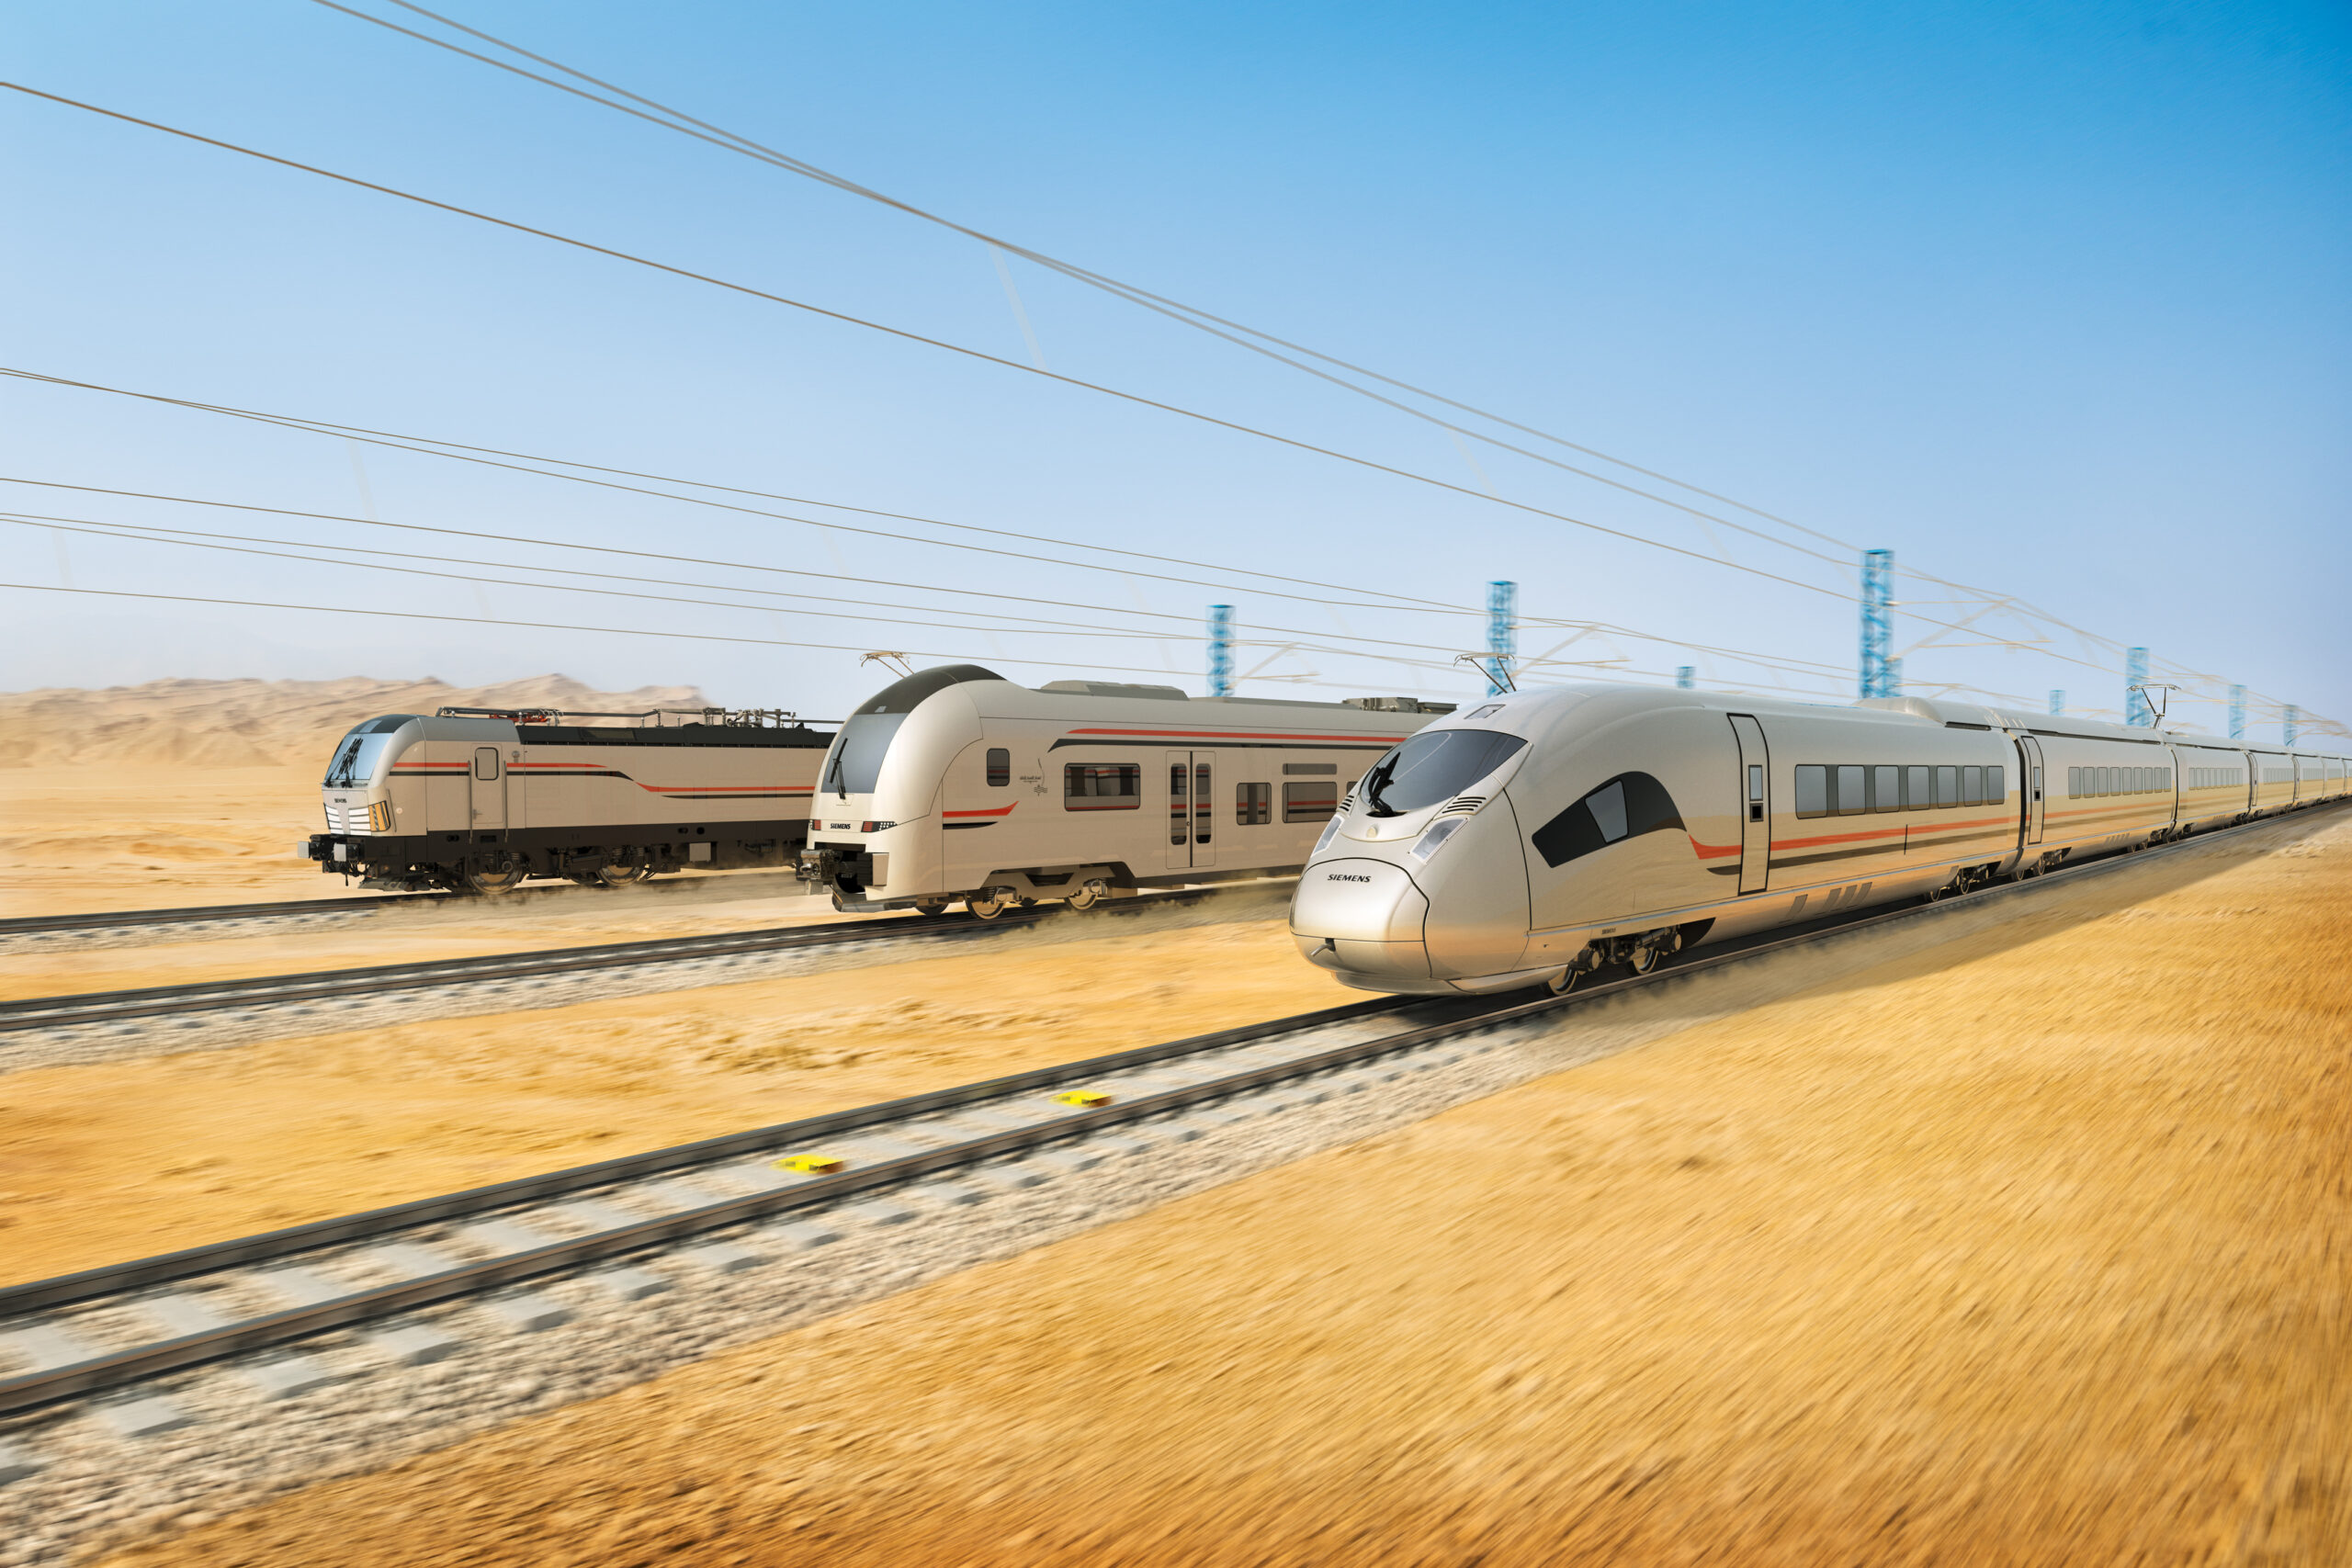 In 2022, Siemens signed the largest railway contract in its history in Egypt